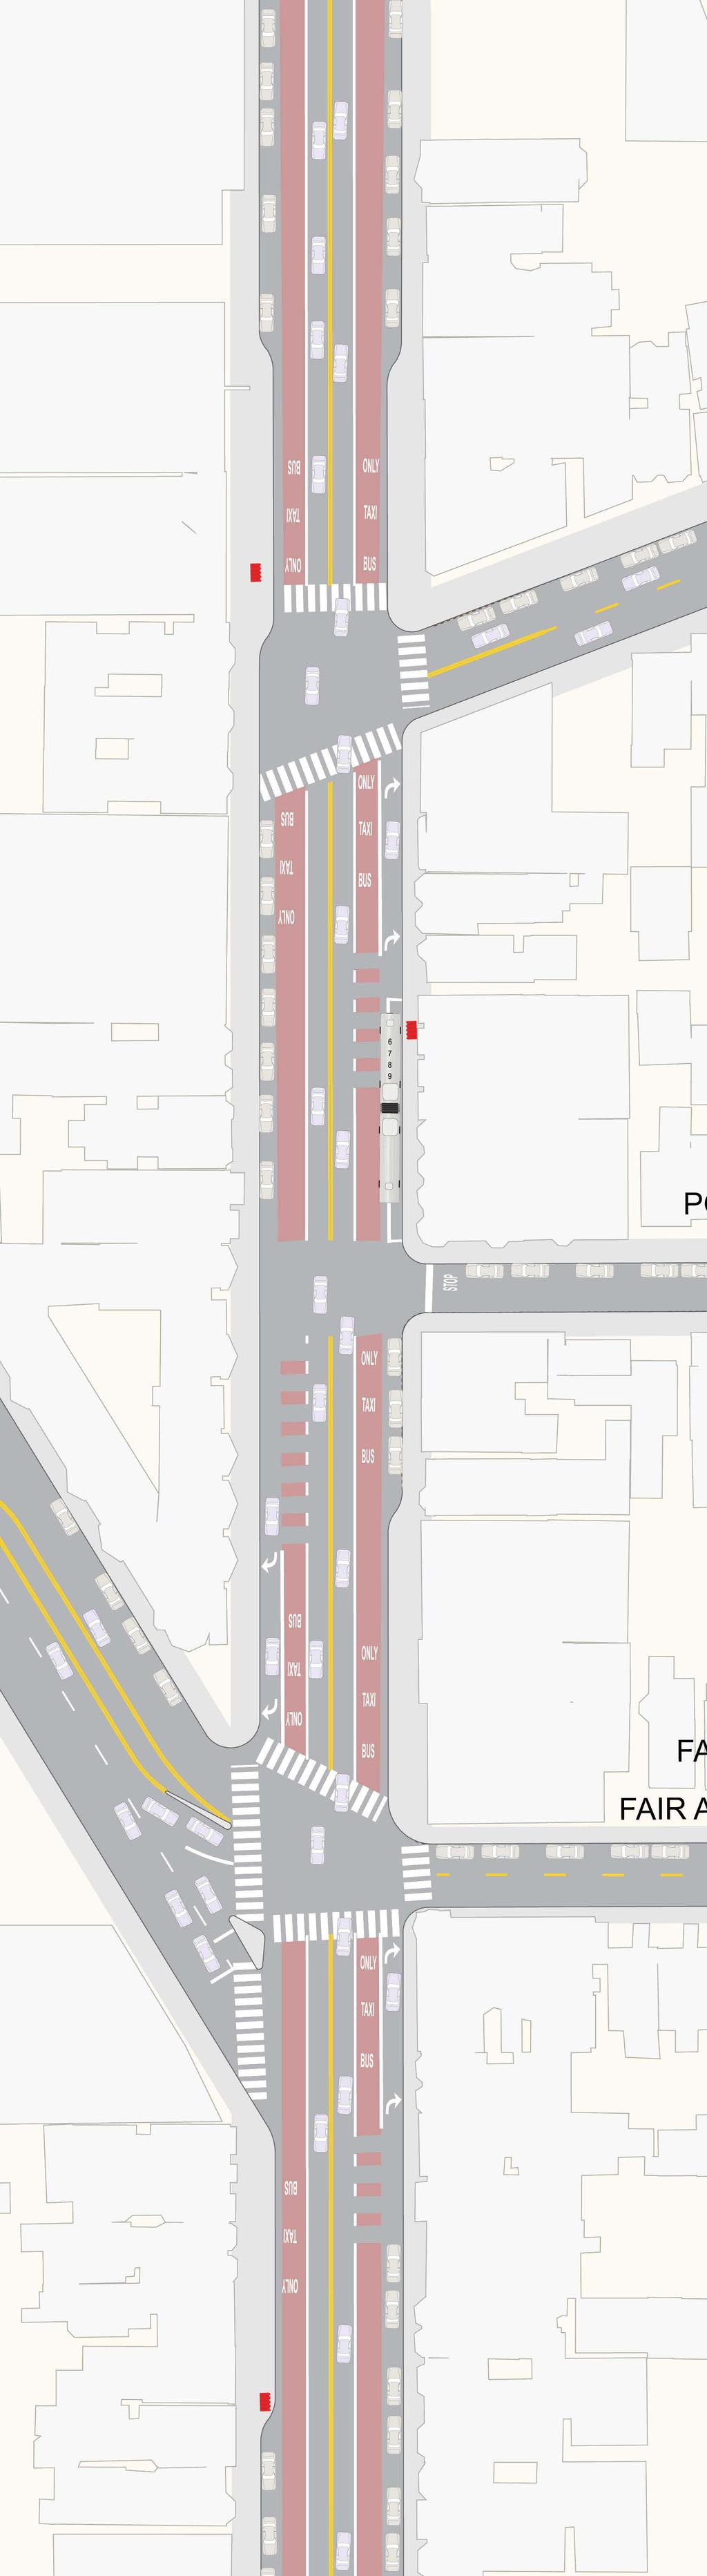 Proposal Detail: Precita to Valencia on Mission from César Chávez St to A bus-only lane gives Muni vehicles their own lane separate from regular traffic.